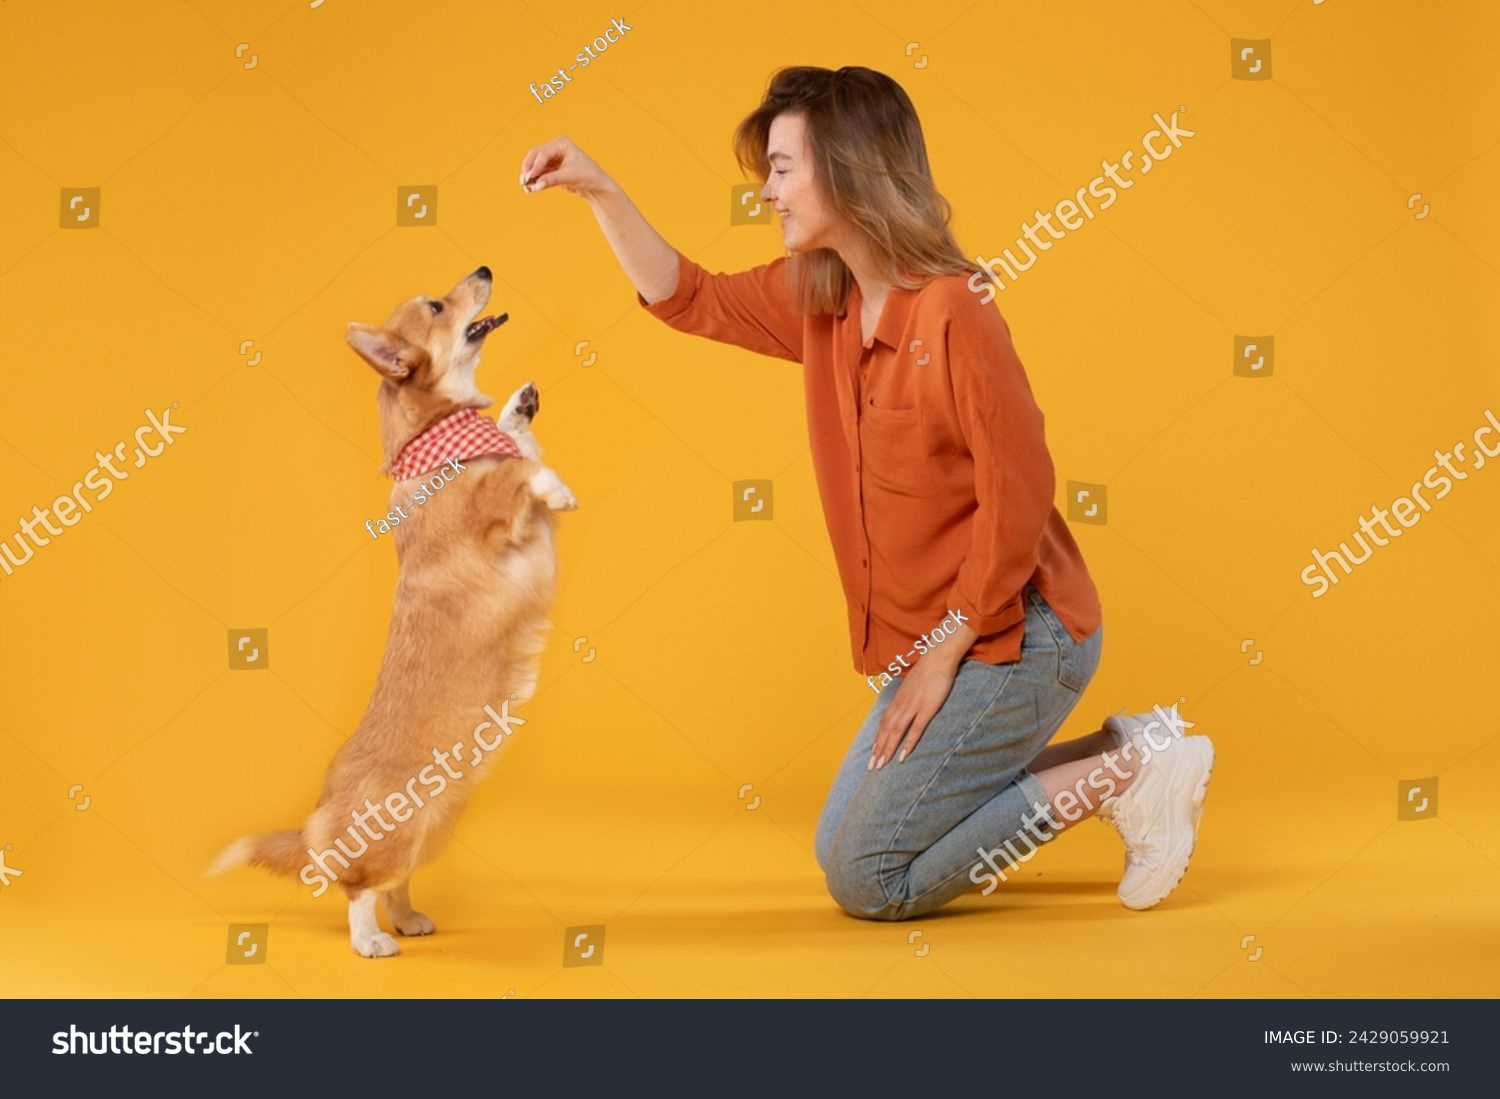 Happy woman joyfully engages in play and training activities with her attentive pembroke welsh corgi dog, sitting on vibrant yellow background, side view #2429059921